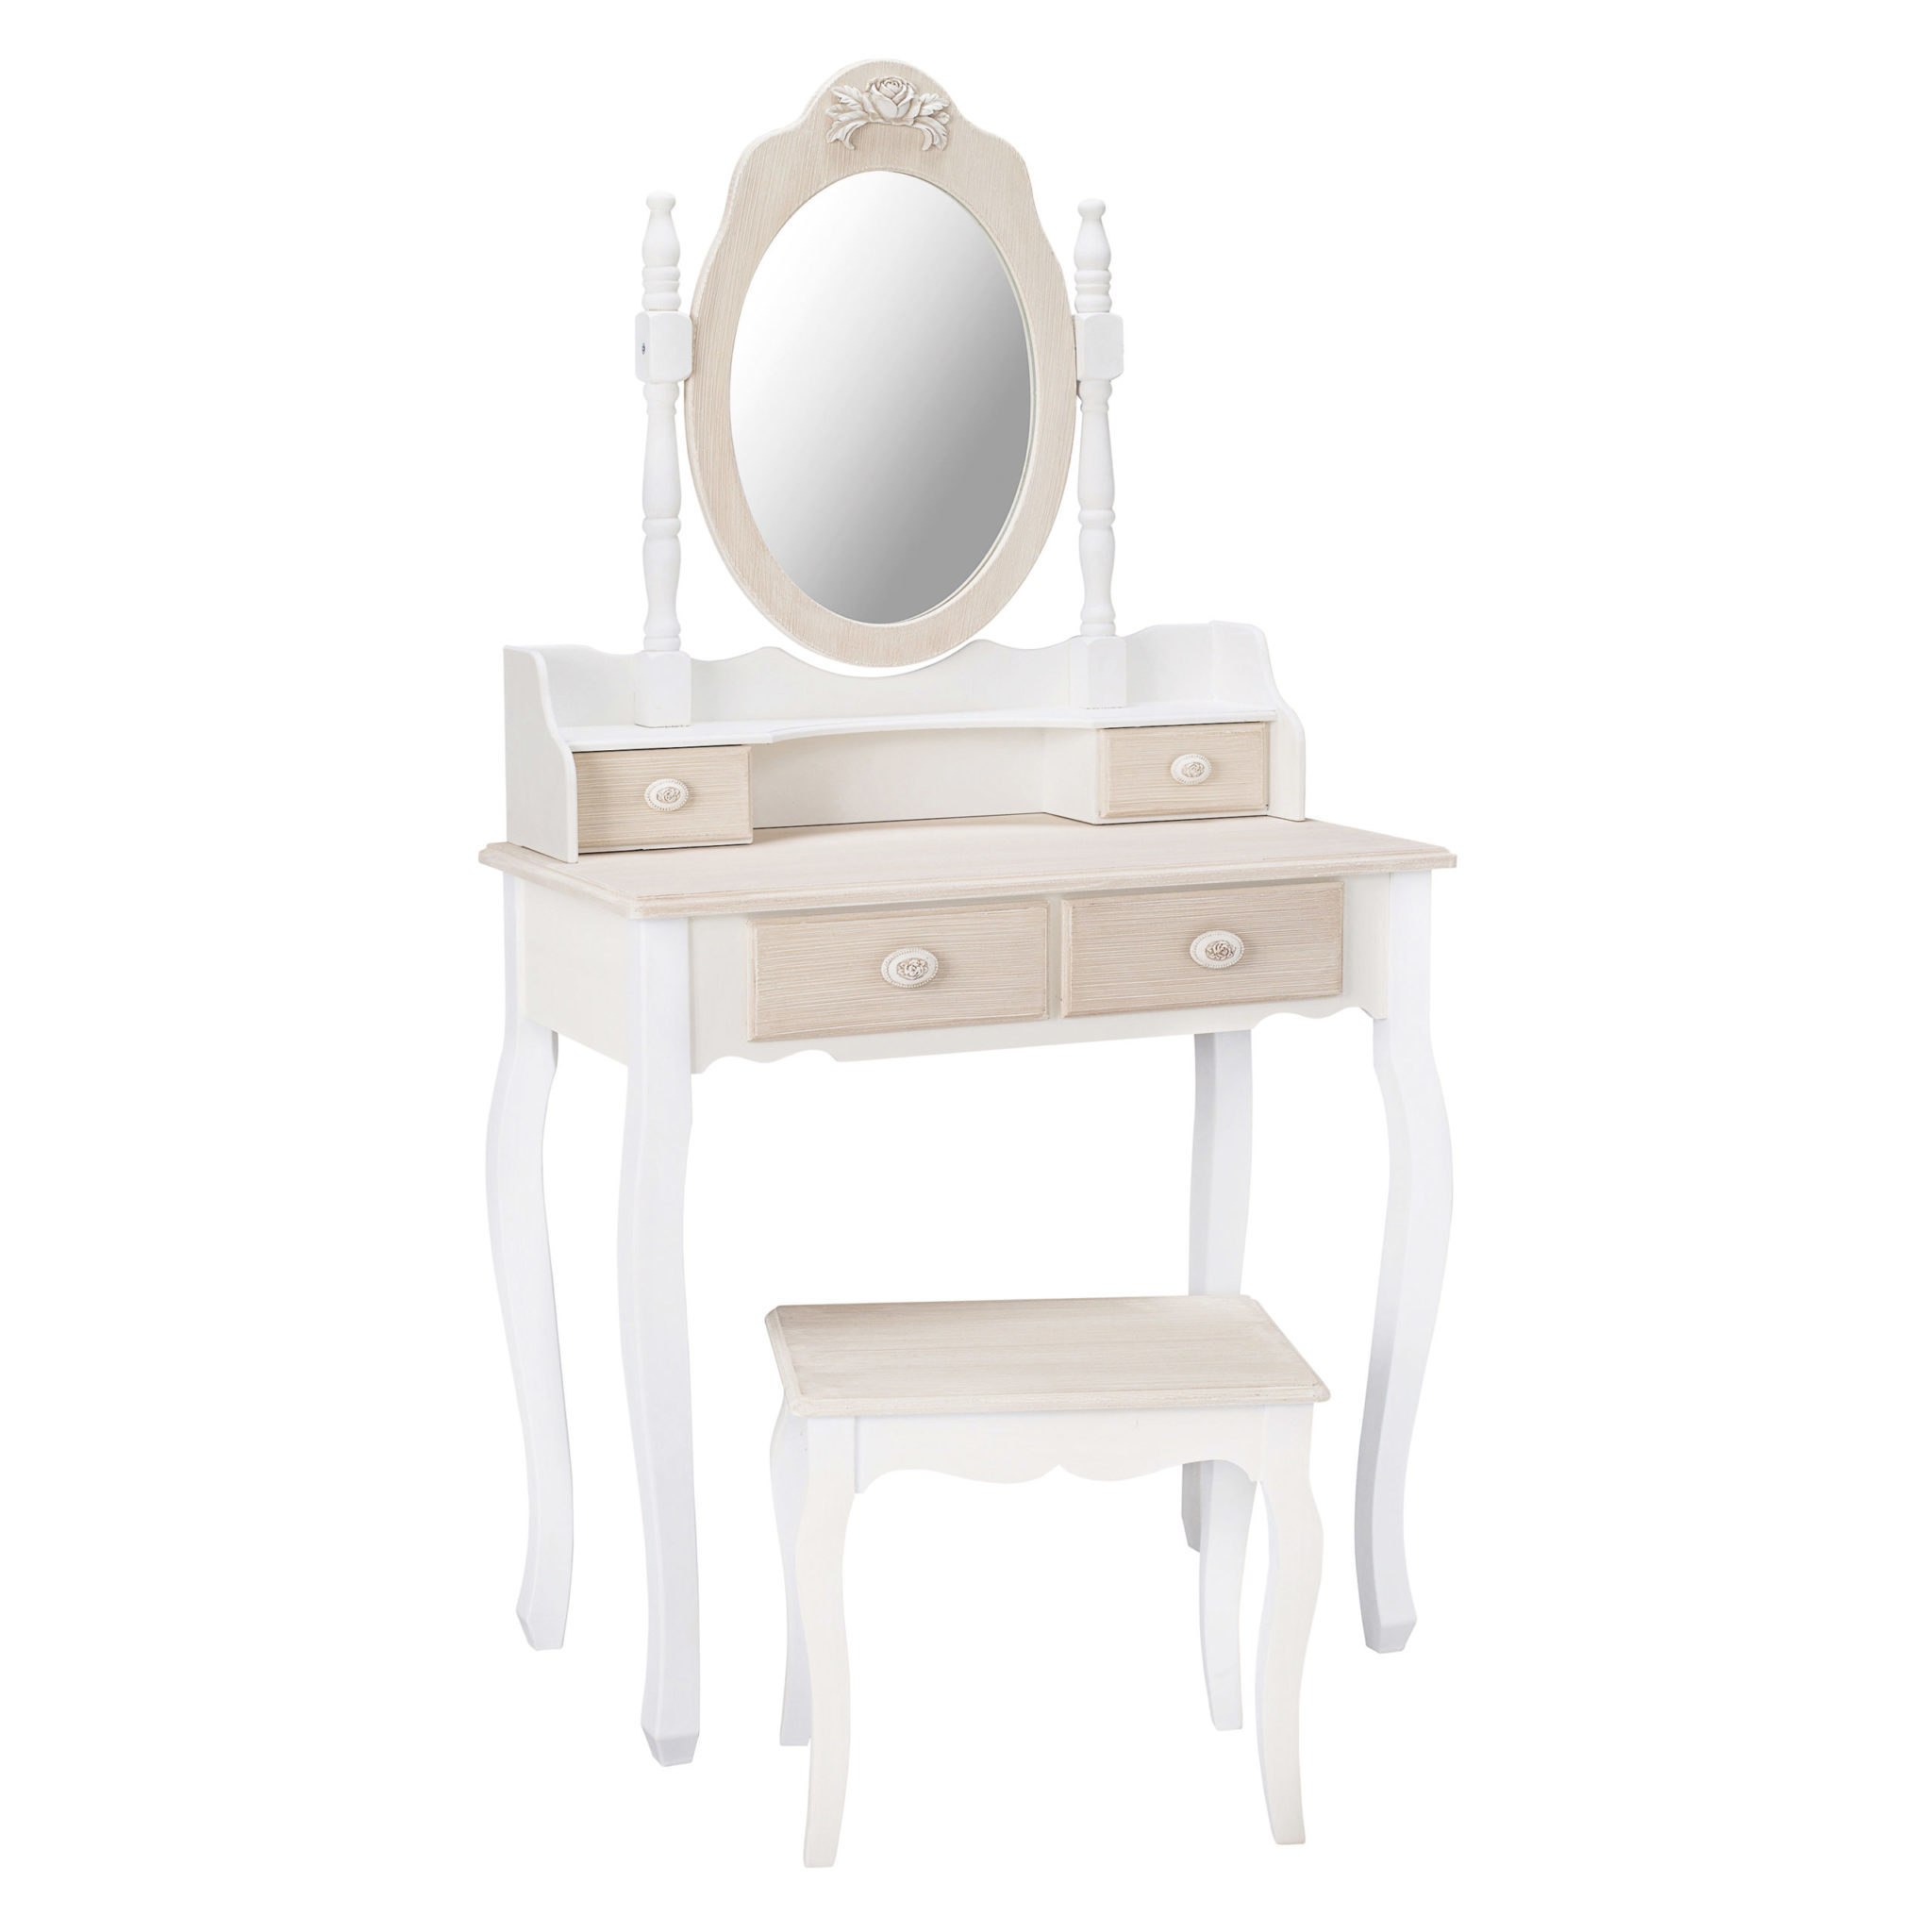 Jewel Dressing Table Base Only